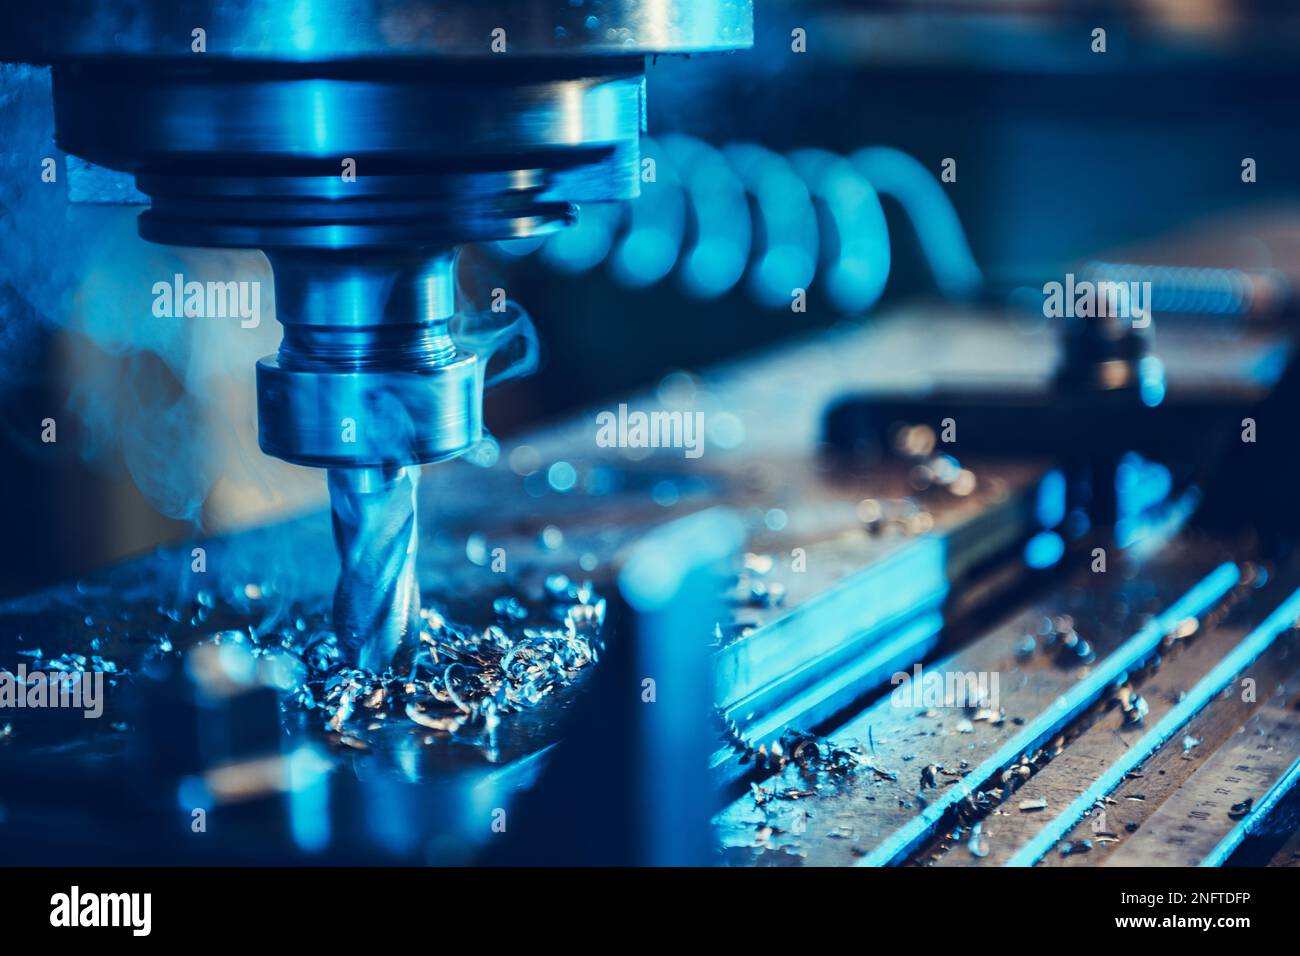 CNC Milling Machine During Operation. Nozzle Part Closeup. Production Technology and Manufacturing Equipment Theme. Stock Photo